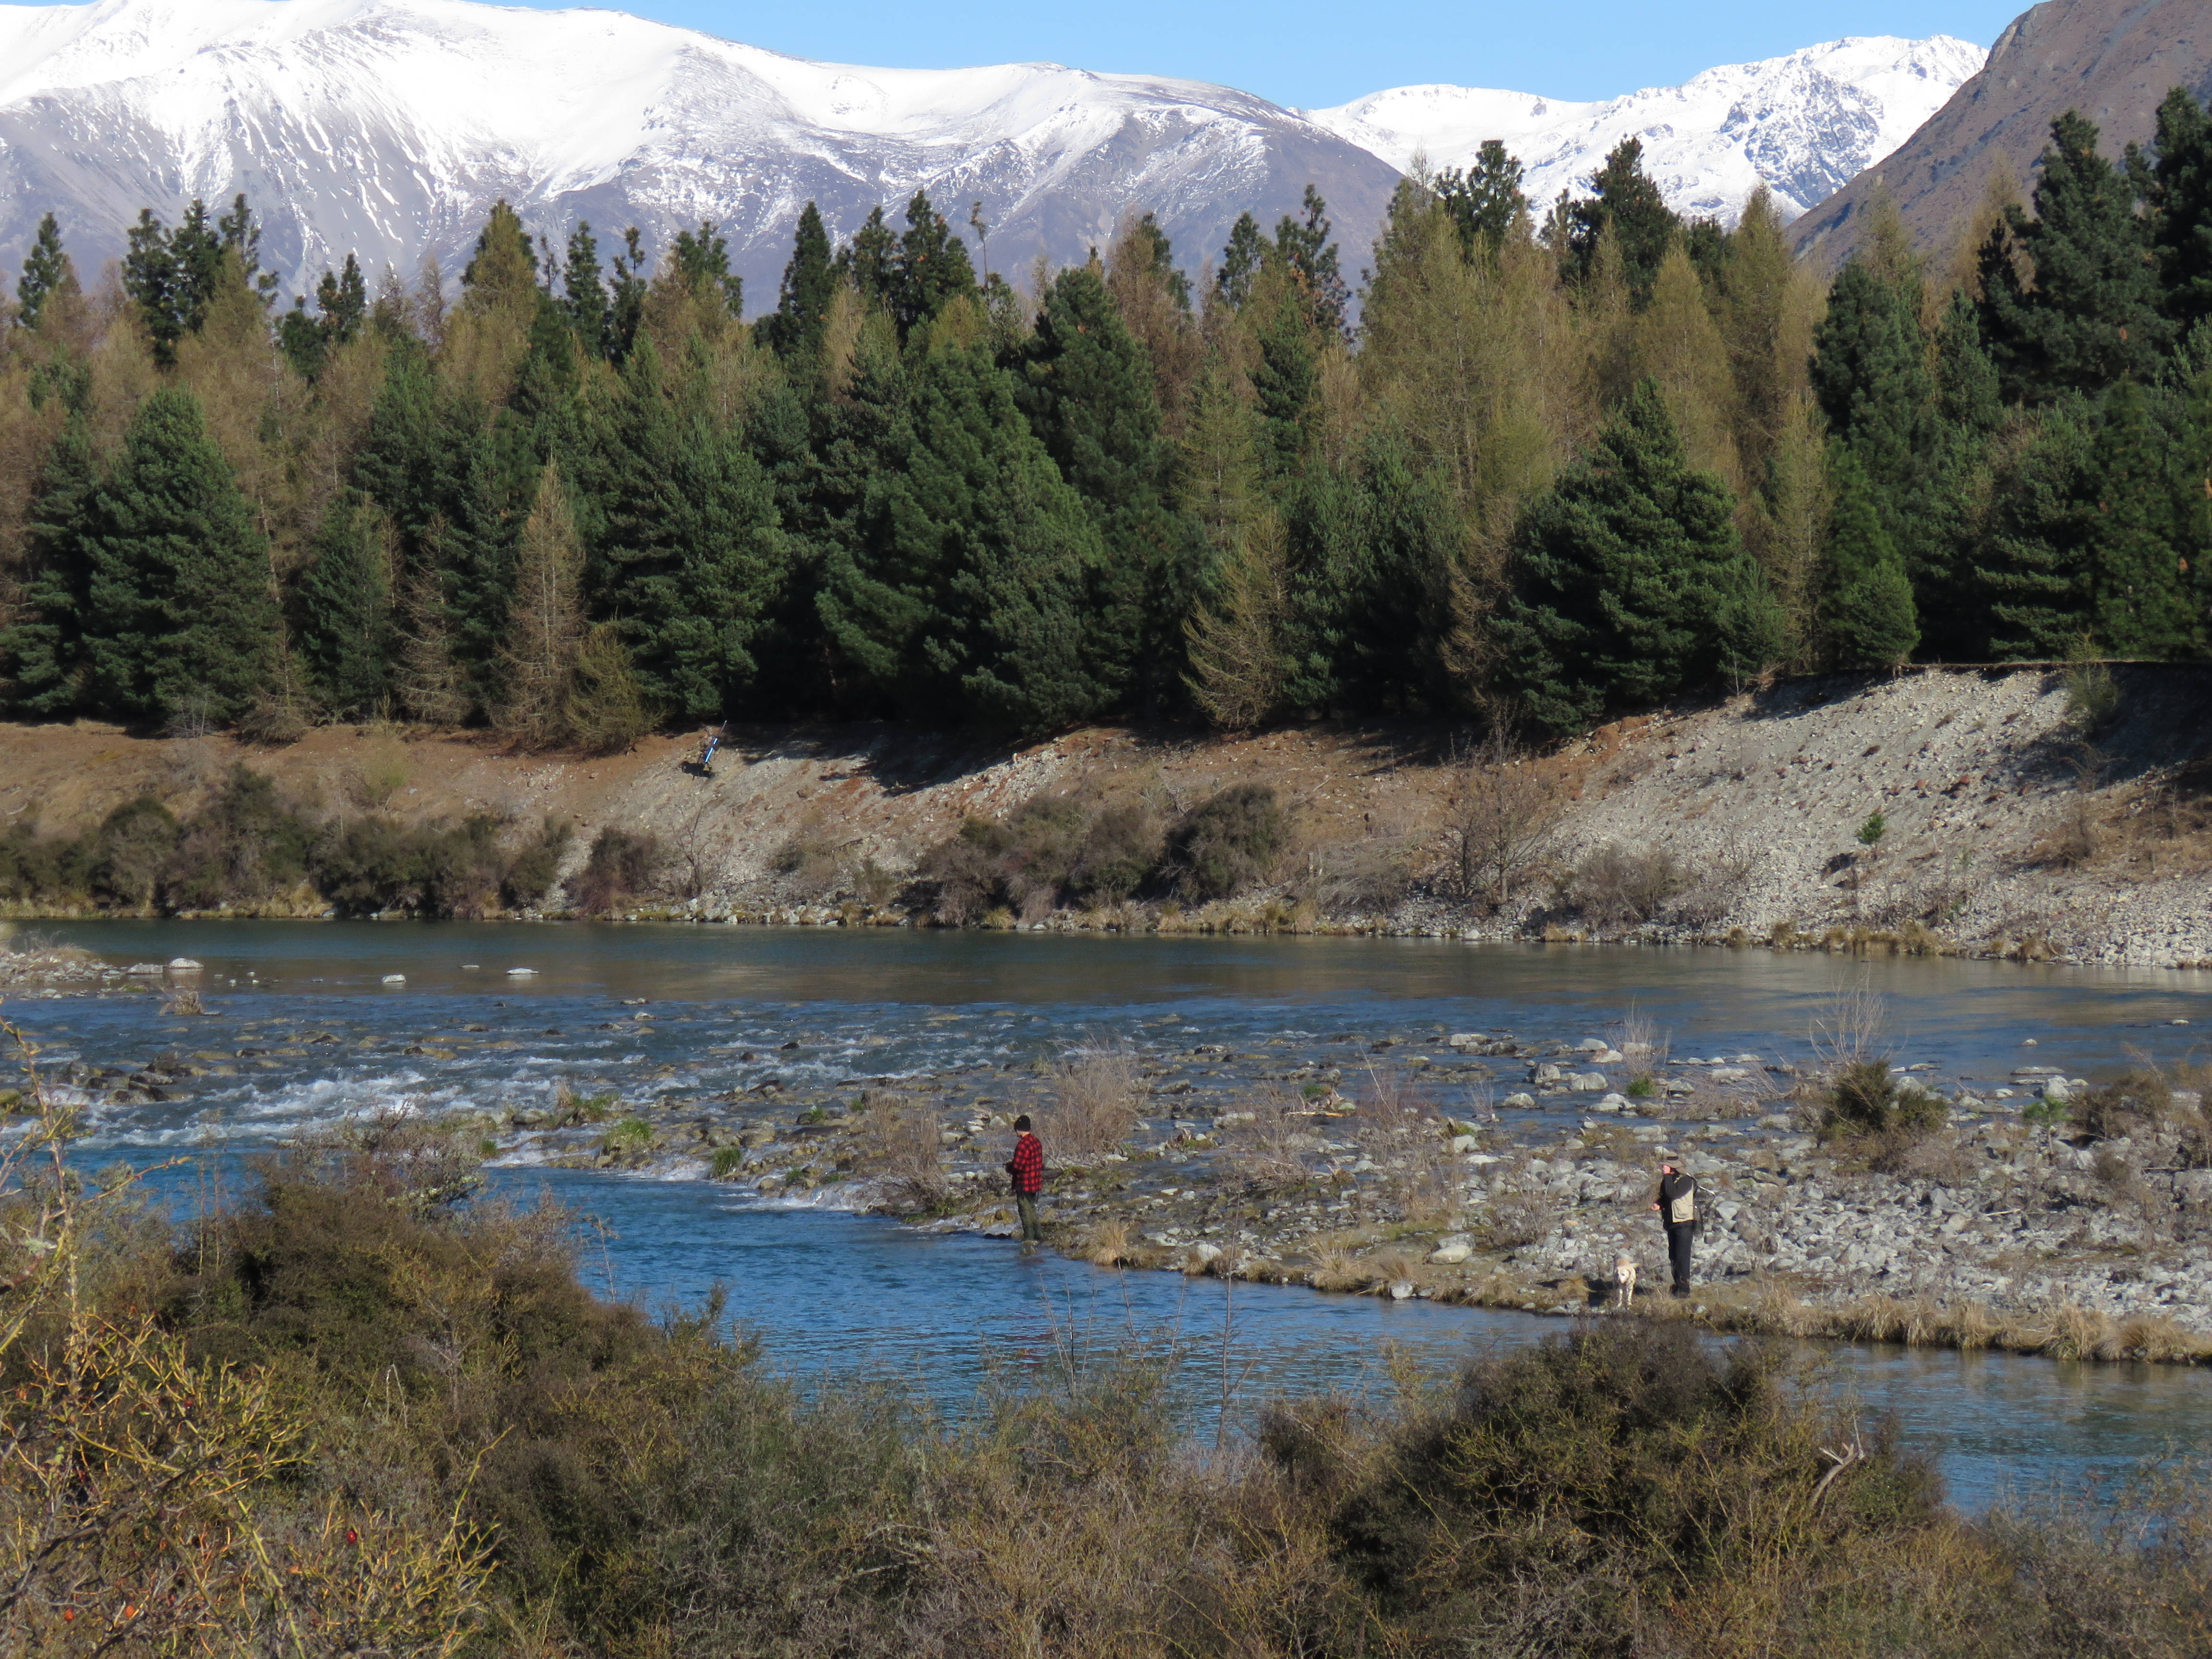 RL Sept 4 The upper Ohau River opens for trout fishing on 1 October 2021 and a backcountry licence endorsement is now required in addition to holding a sports fishing licence